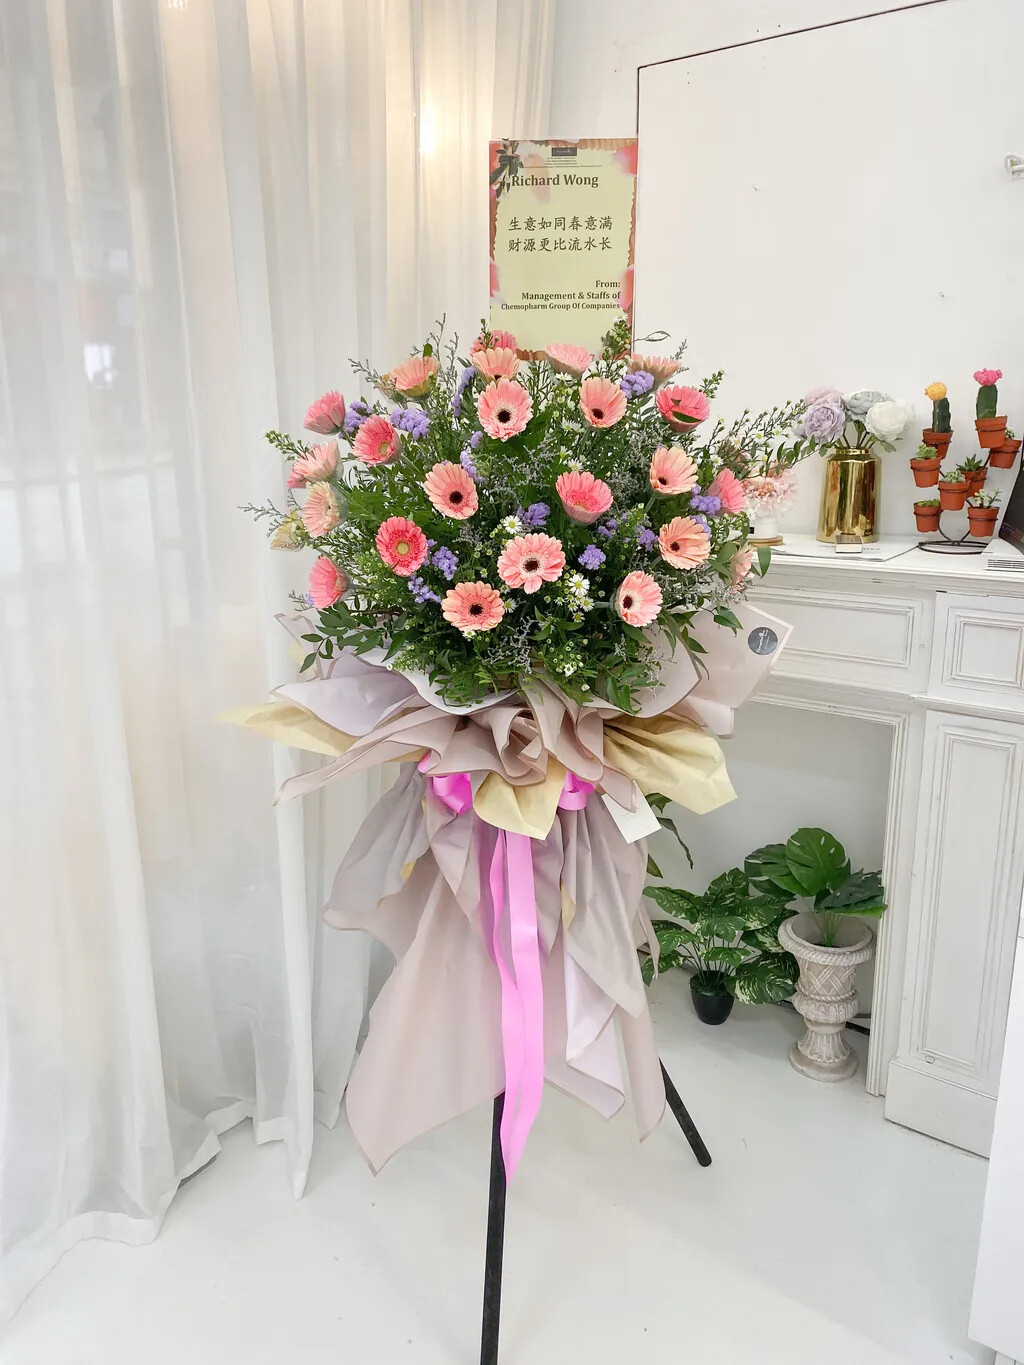 Miscious Grand Opening Flower Stand (By: Temptation Florist from Seremban)